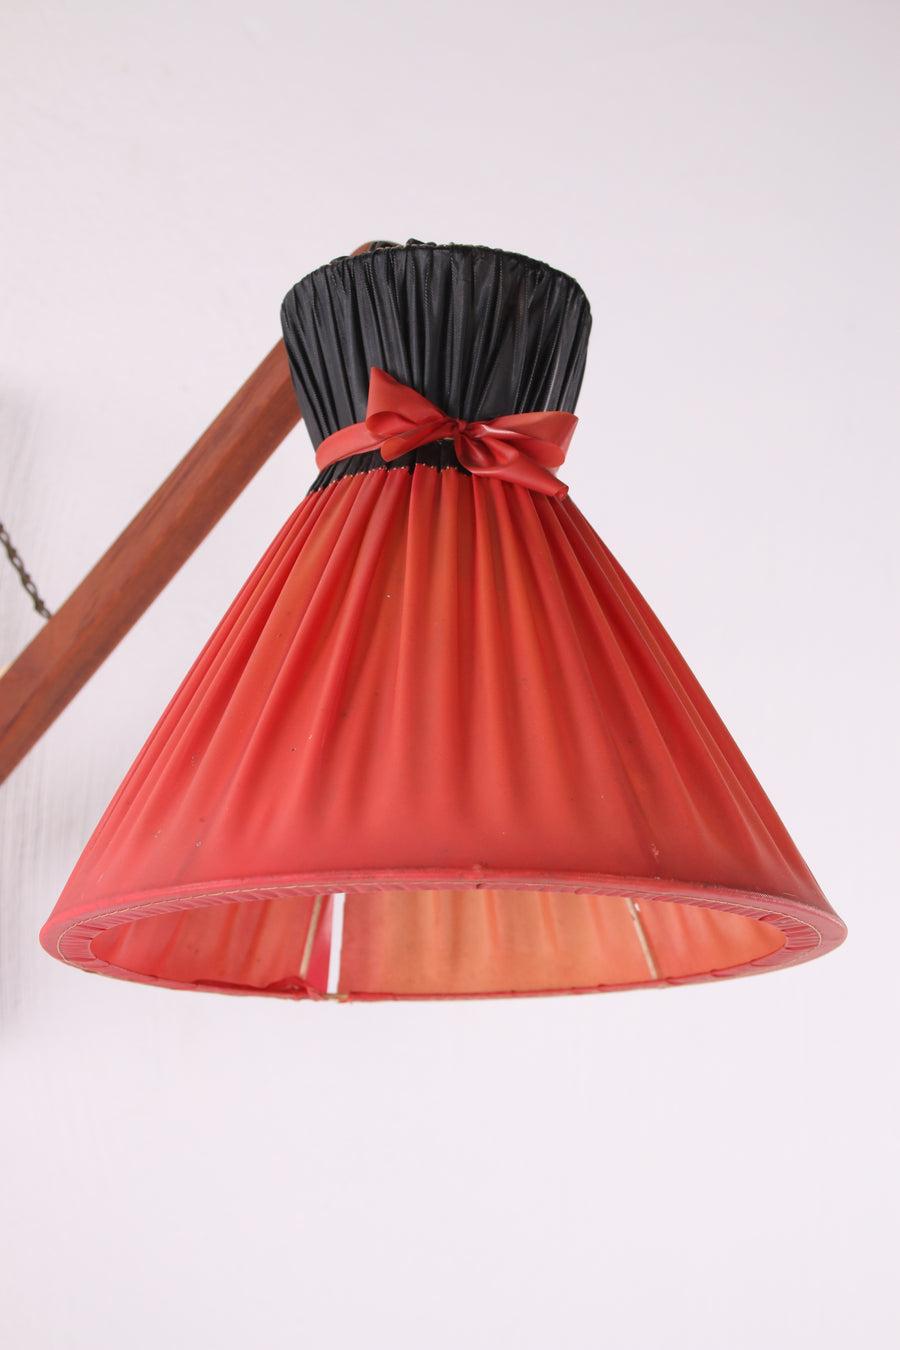 Mid-Century Modern Danish Design Wall Lamp with Original Shade, 1960s For Sale